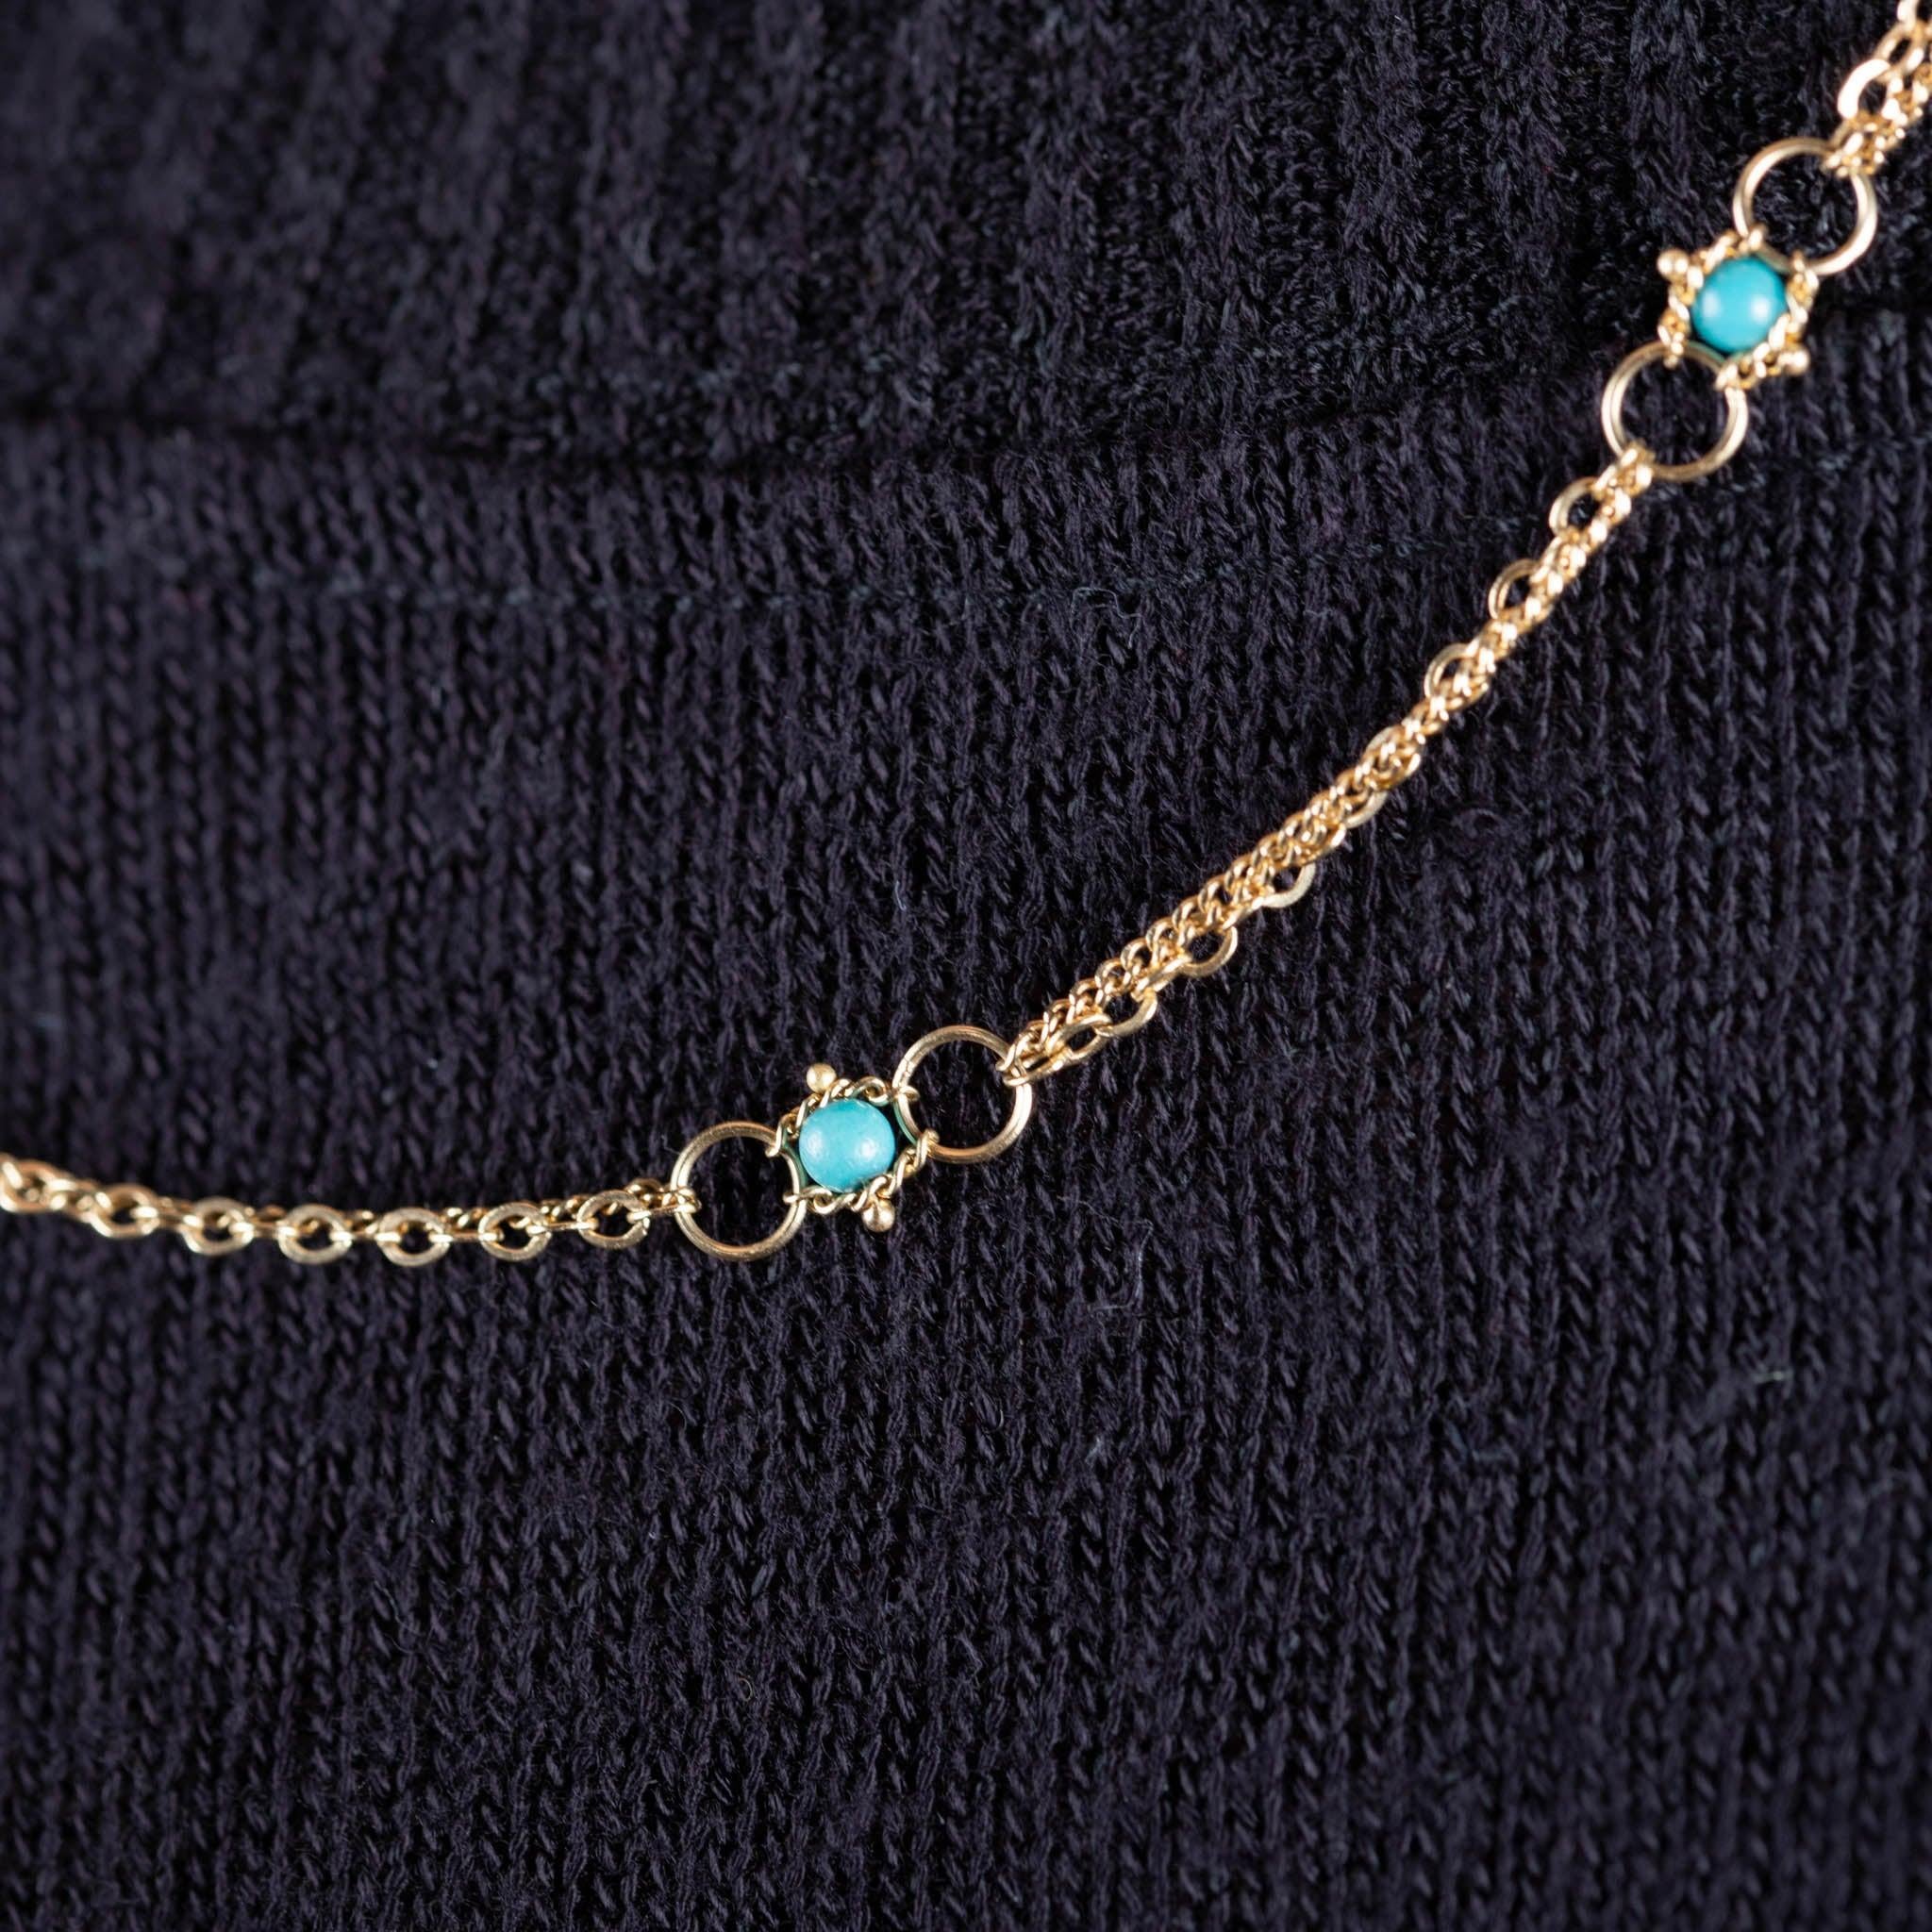 Delightful blue Turquoise stones, suspended between two tiny gold hoops, are hand woven with 18k yellow gold to make up this dazzling necklace. The perfect addition to any jewelry collection, it can be worn alone or paired with your favorite